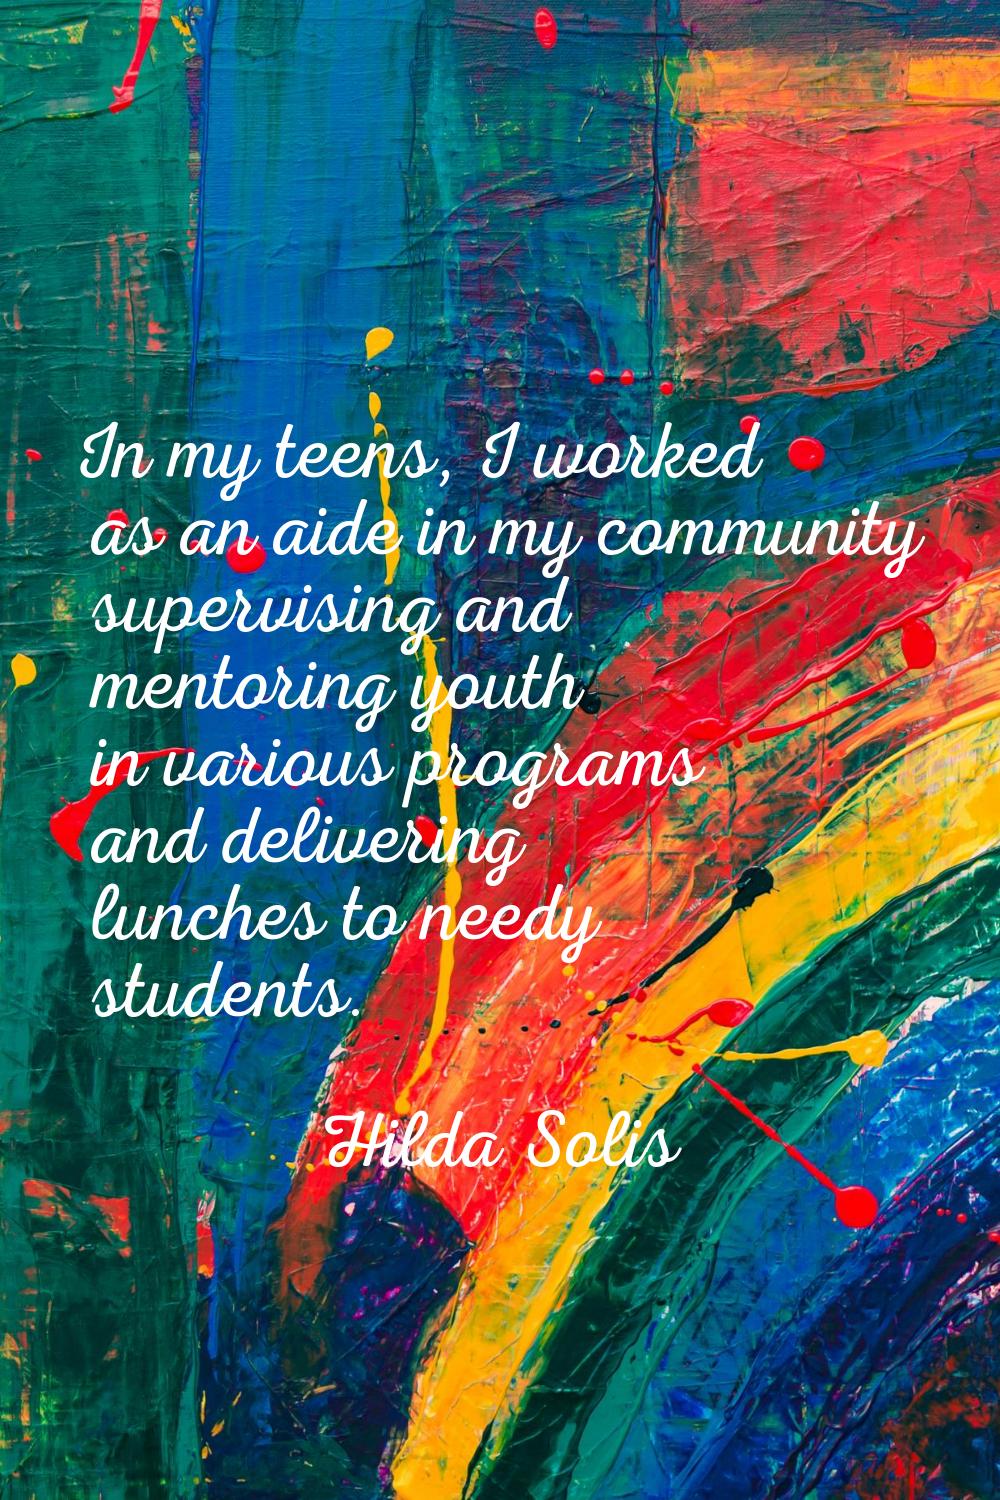 In my teens, I worked as an aide in my community supervising and mentoring youth in various program